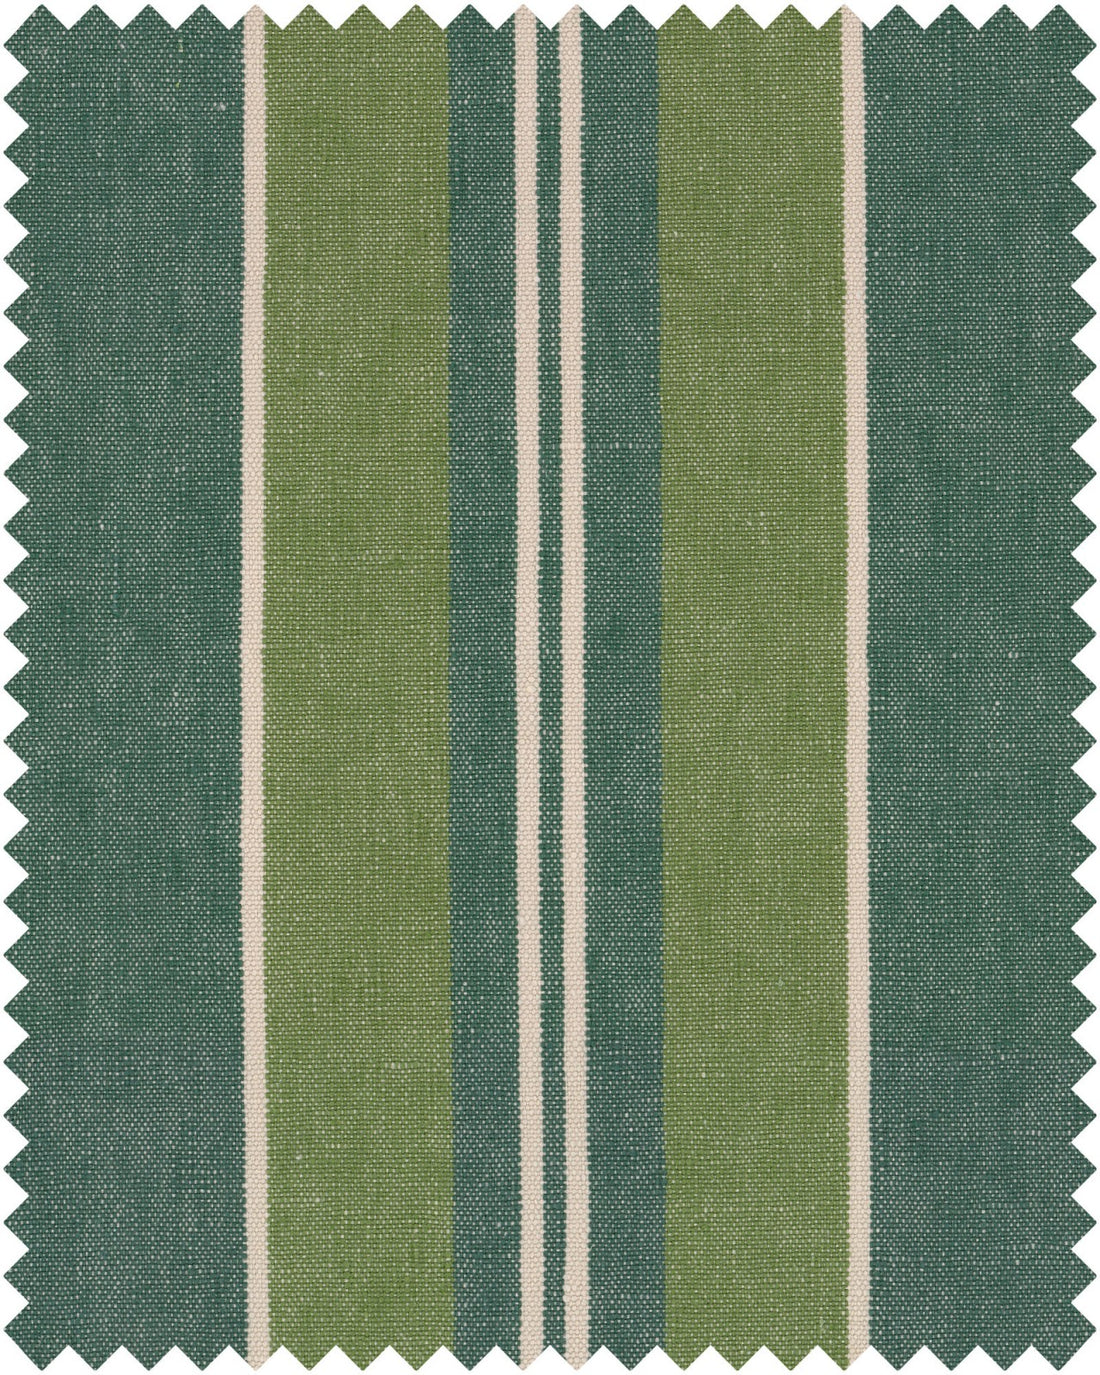 Szépviz Stripe Heavy Linen fabric in green light green white color - pattern number FB00053 - by Mind The Gap in the Transylvanian Roots collection